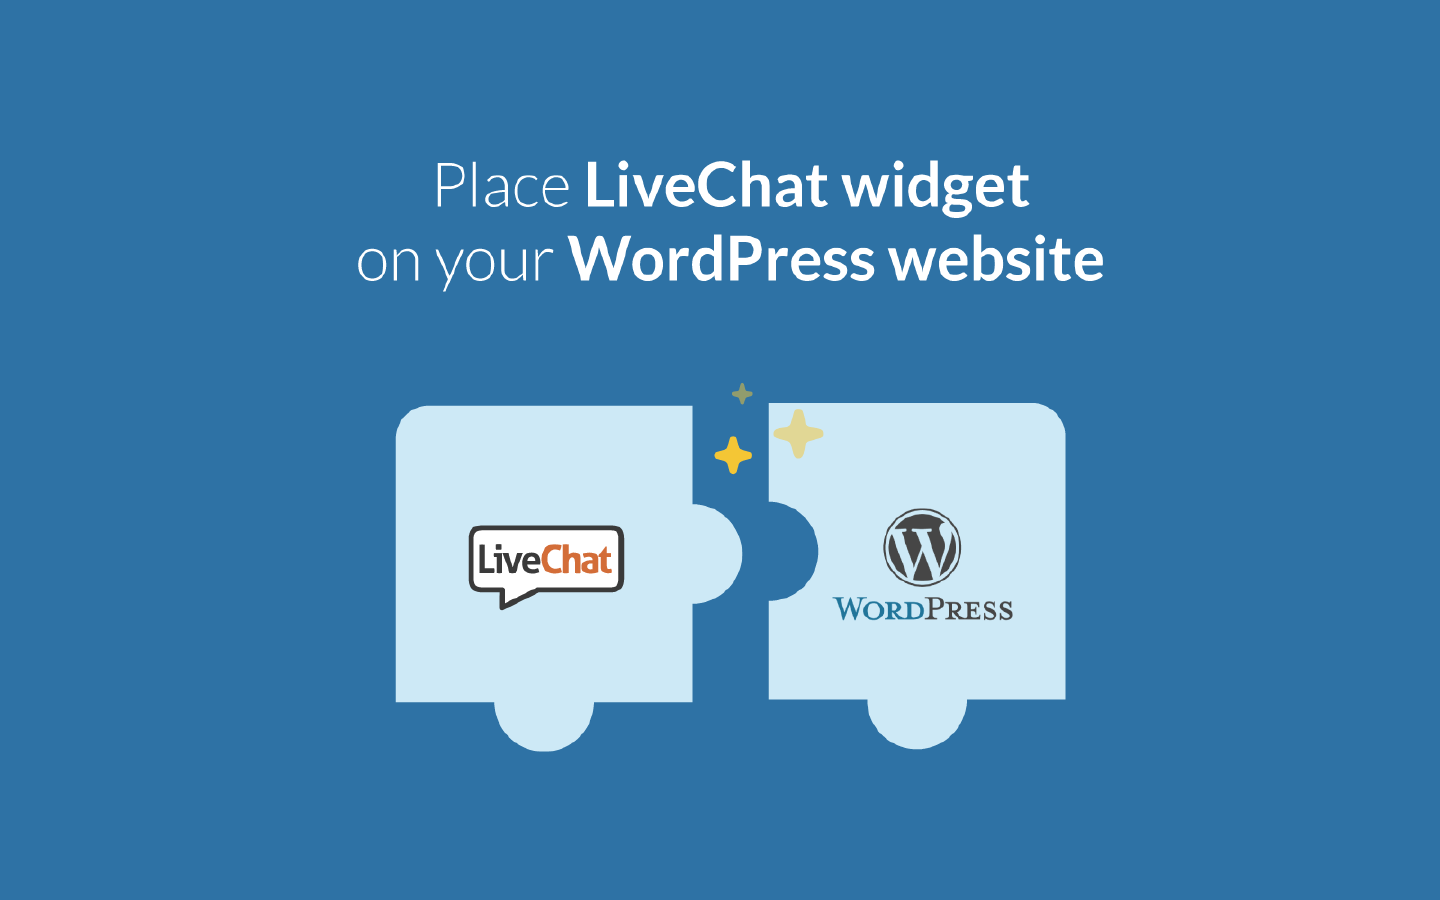 LiveChat integrates with Wordpress